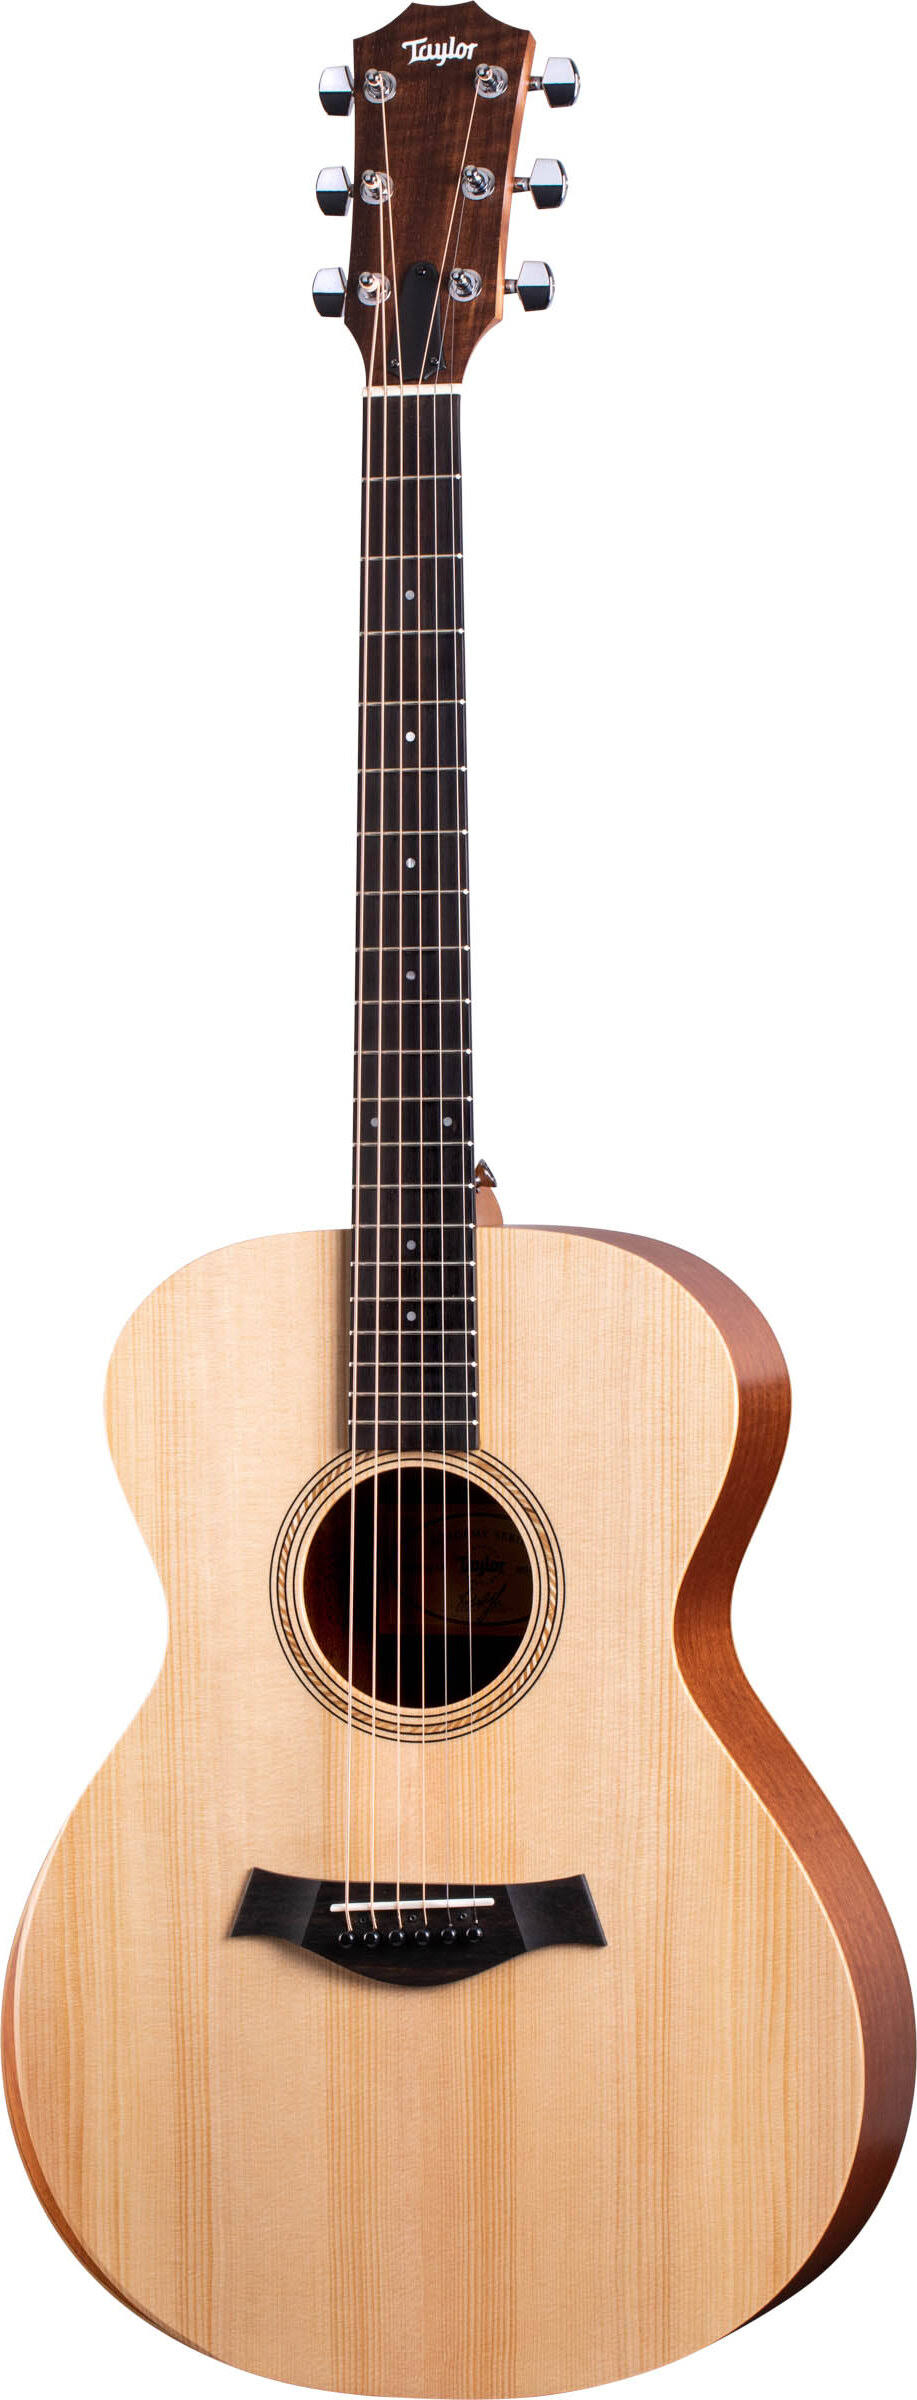 Taylor Academy 12e Acoustic-electric Guitar - Natural